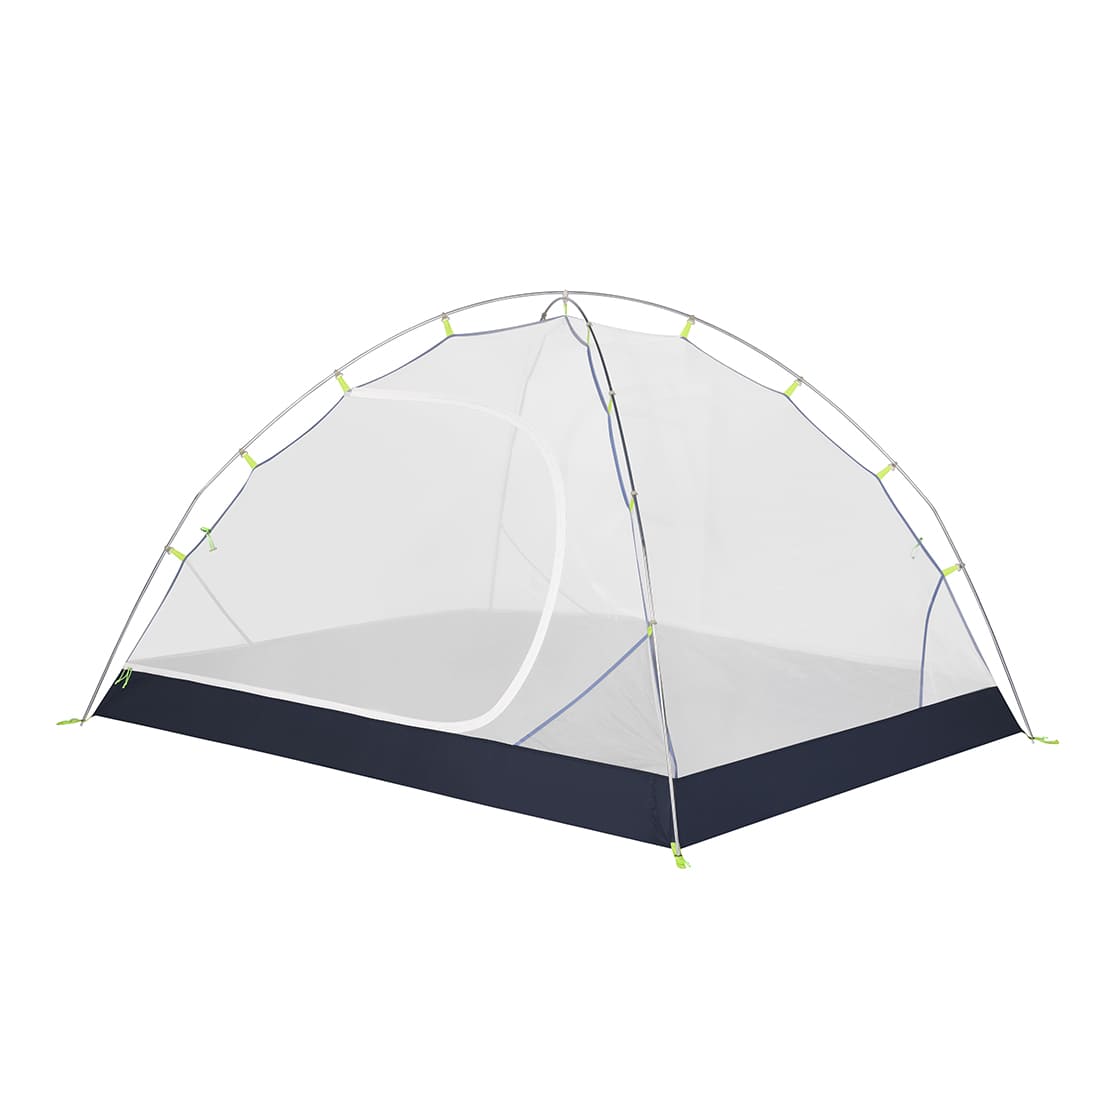 Kailas Triones Camping Tent 3P